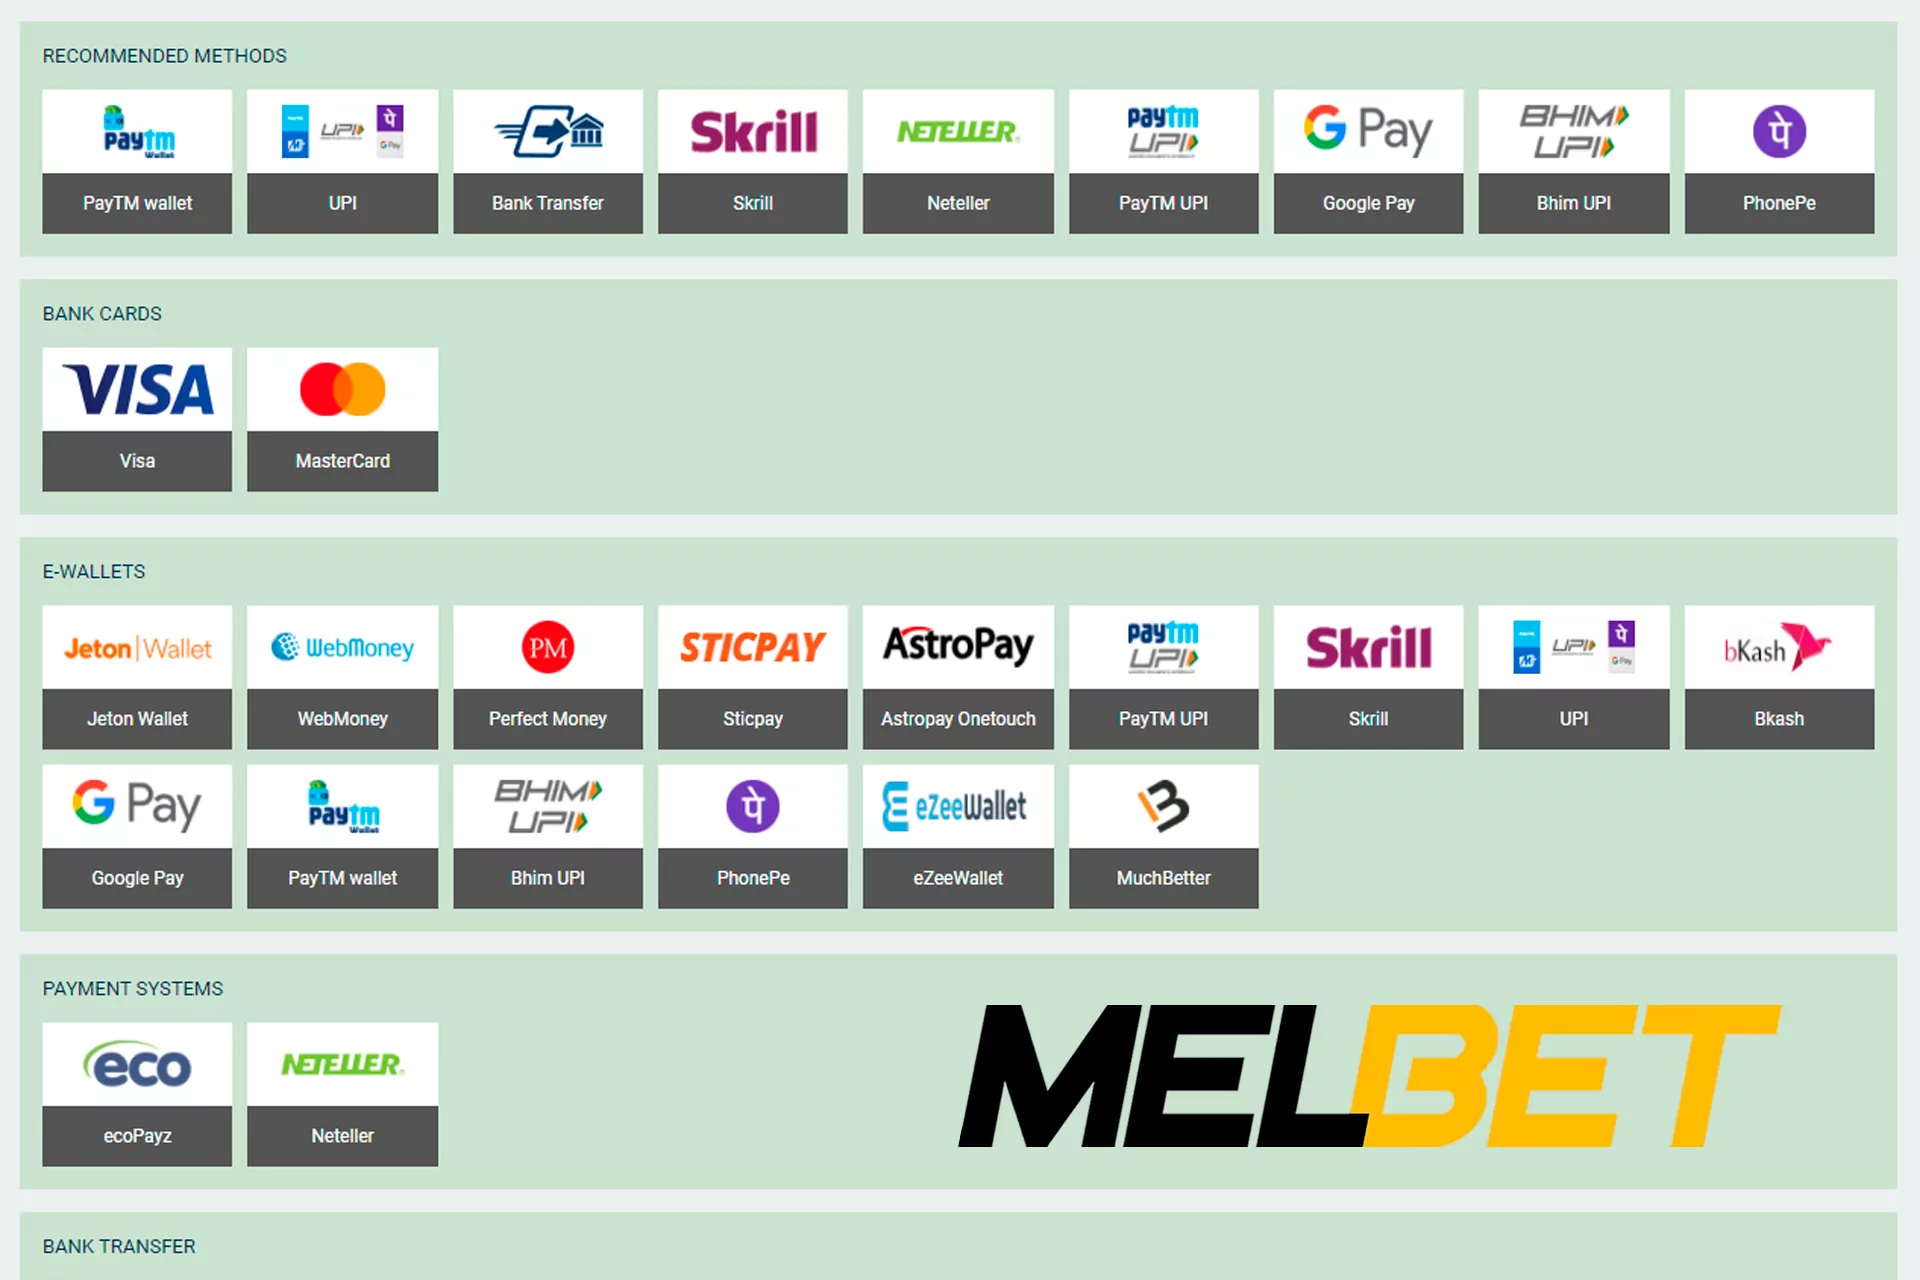 To deposit to Melbet you can use any available in Bangladesh payment systems.